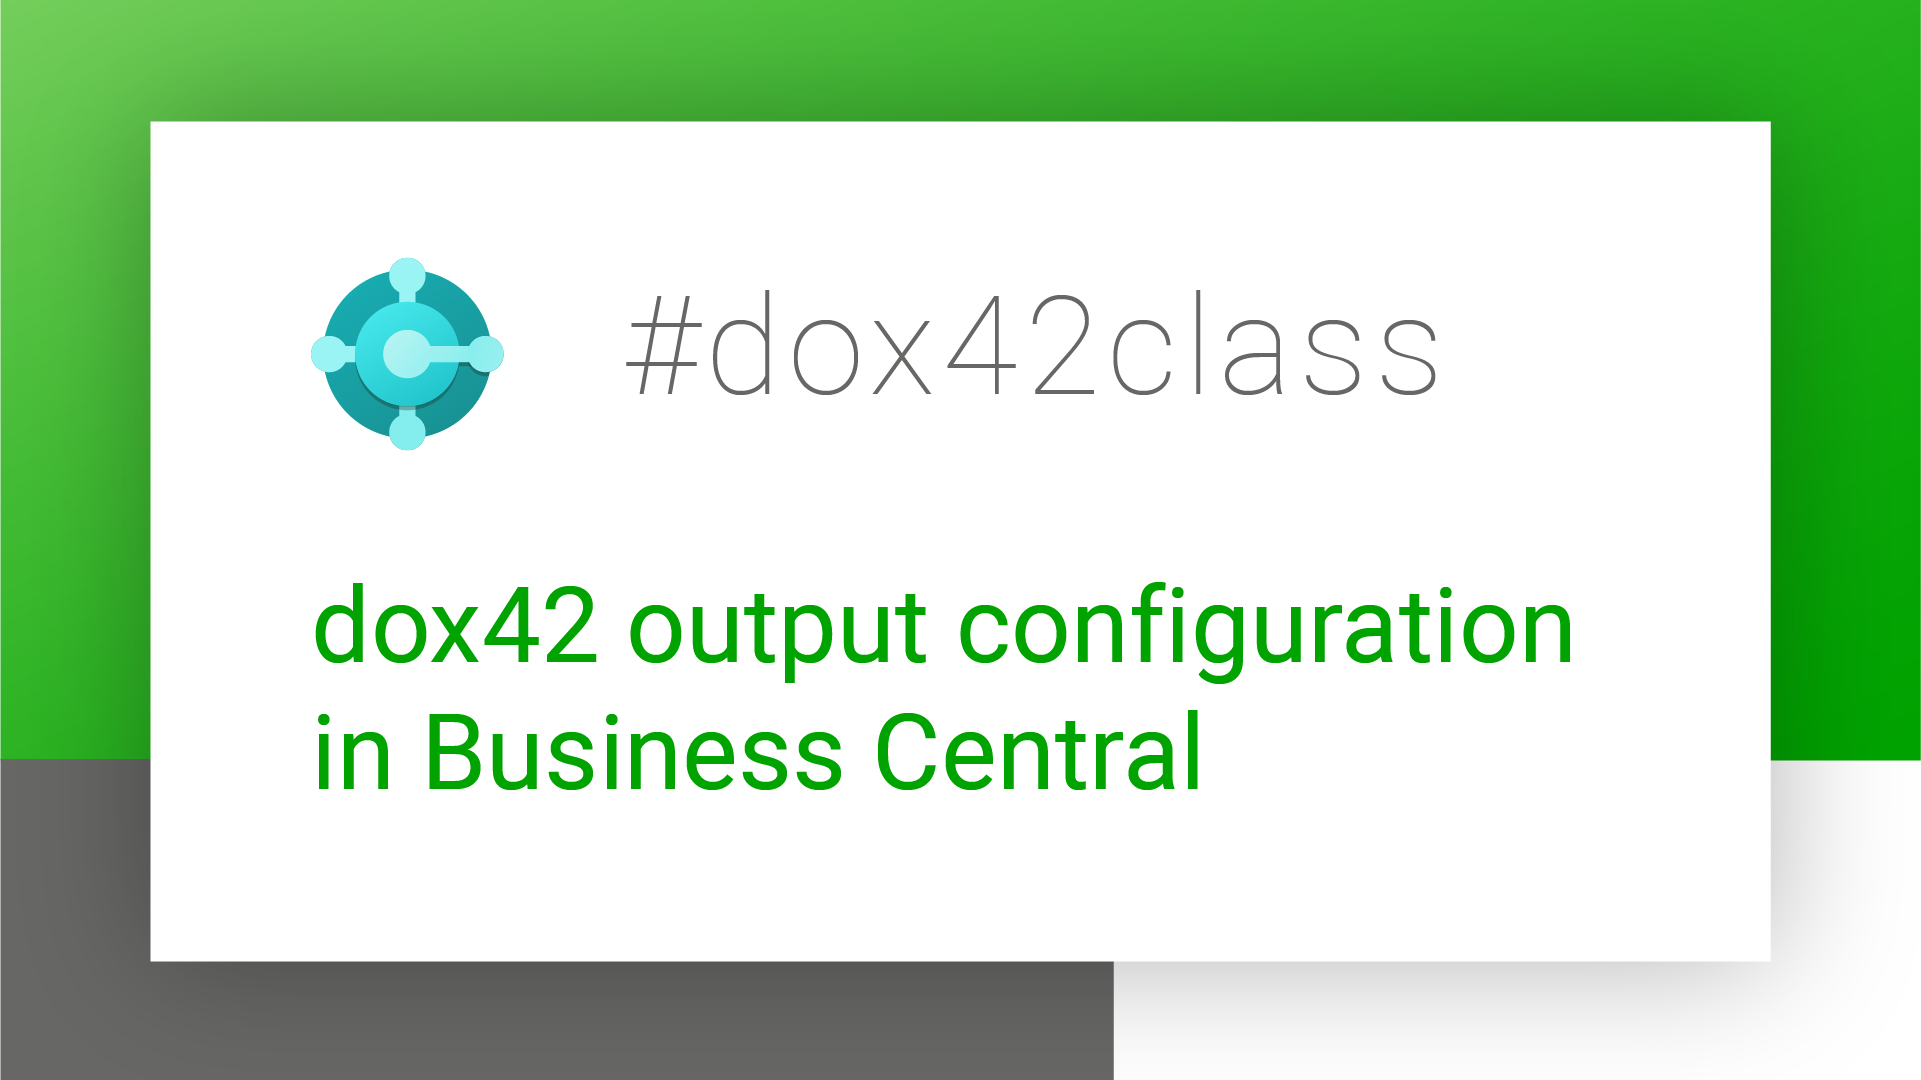 dox42 Class of Output Configuration in Business Central